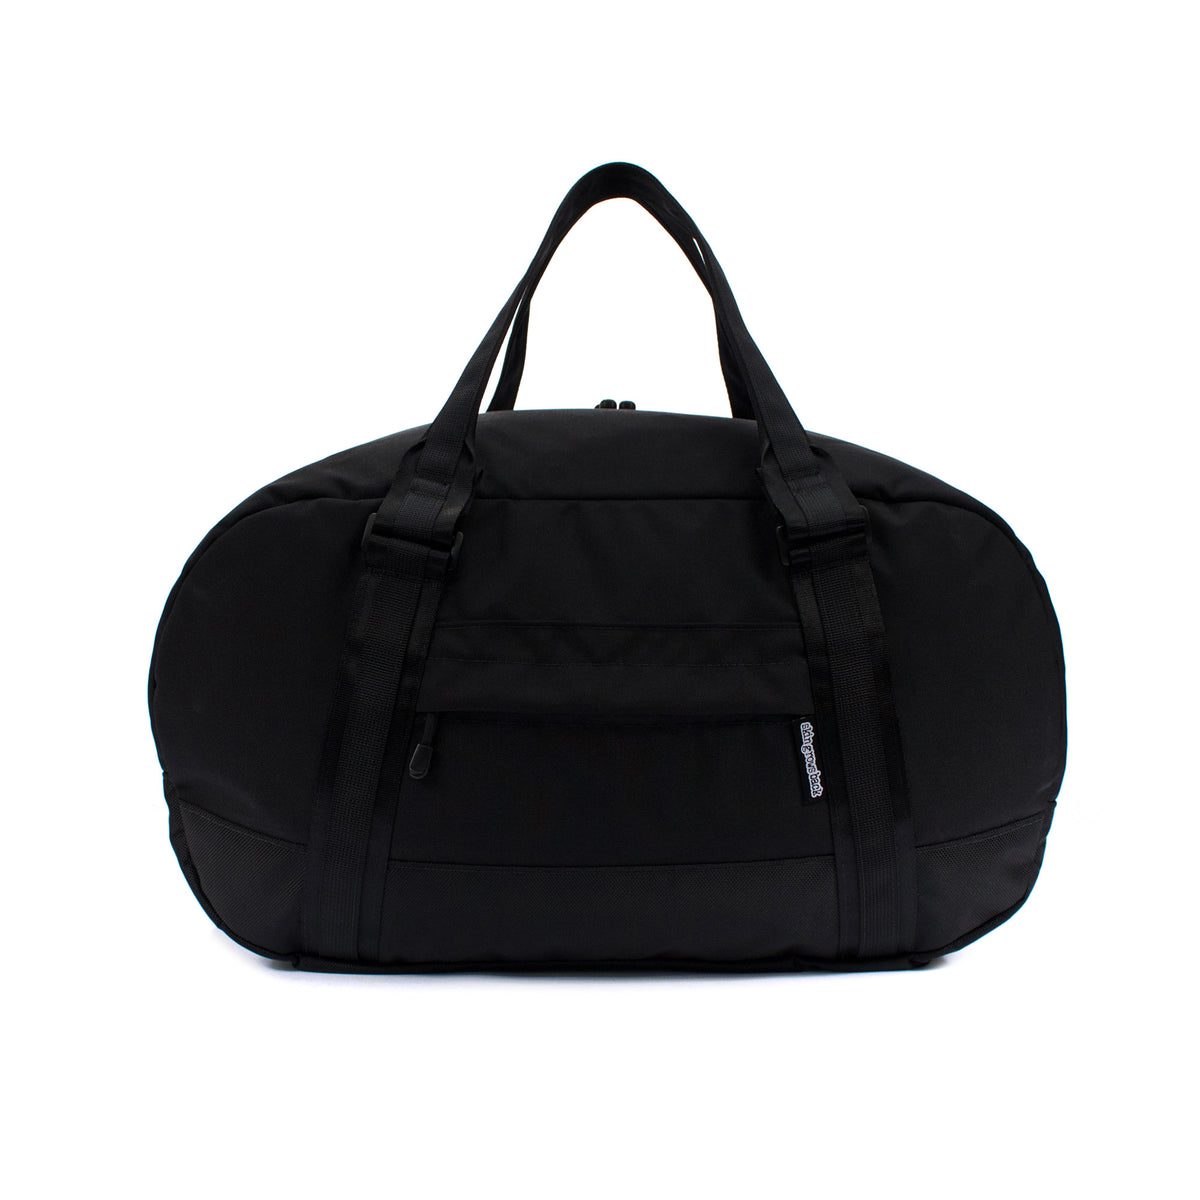 shop skingrowsback duffle bag collection